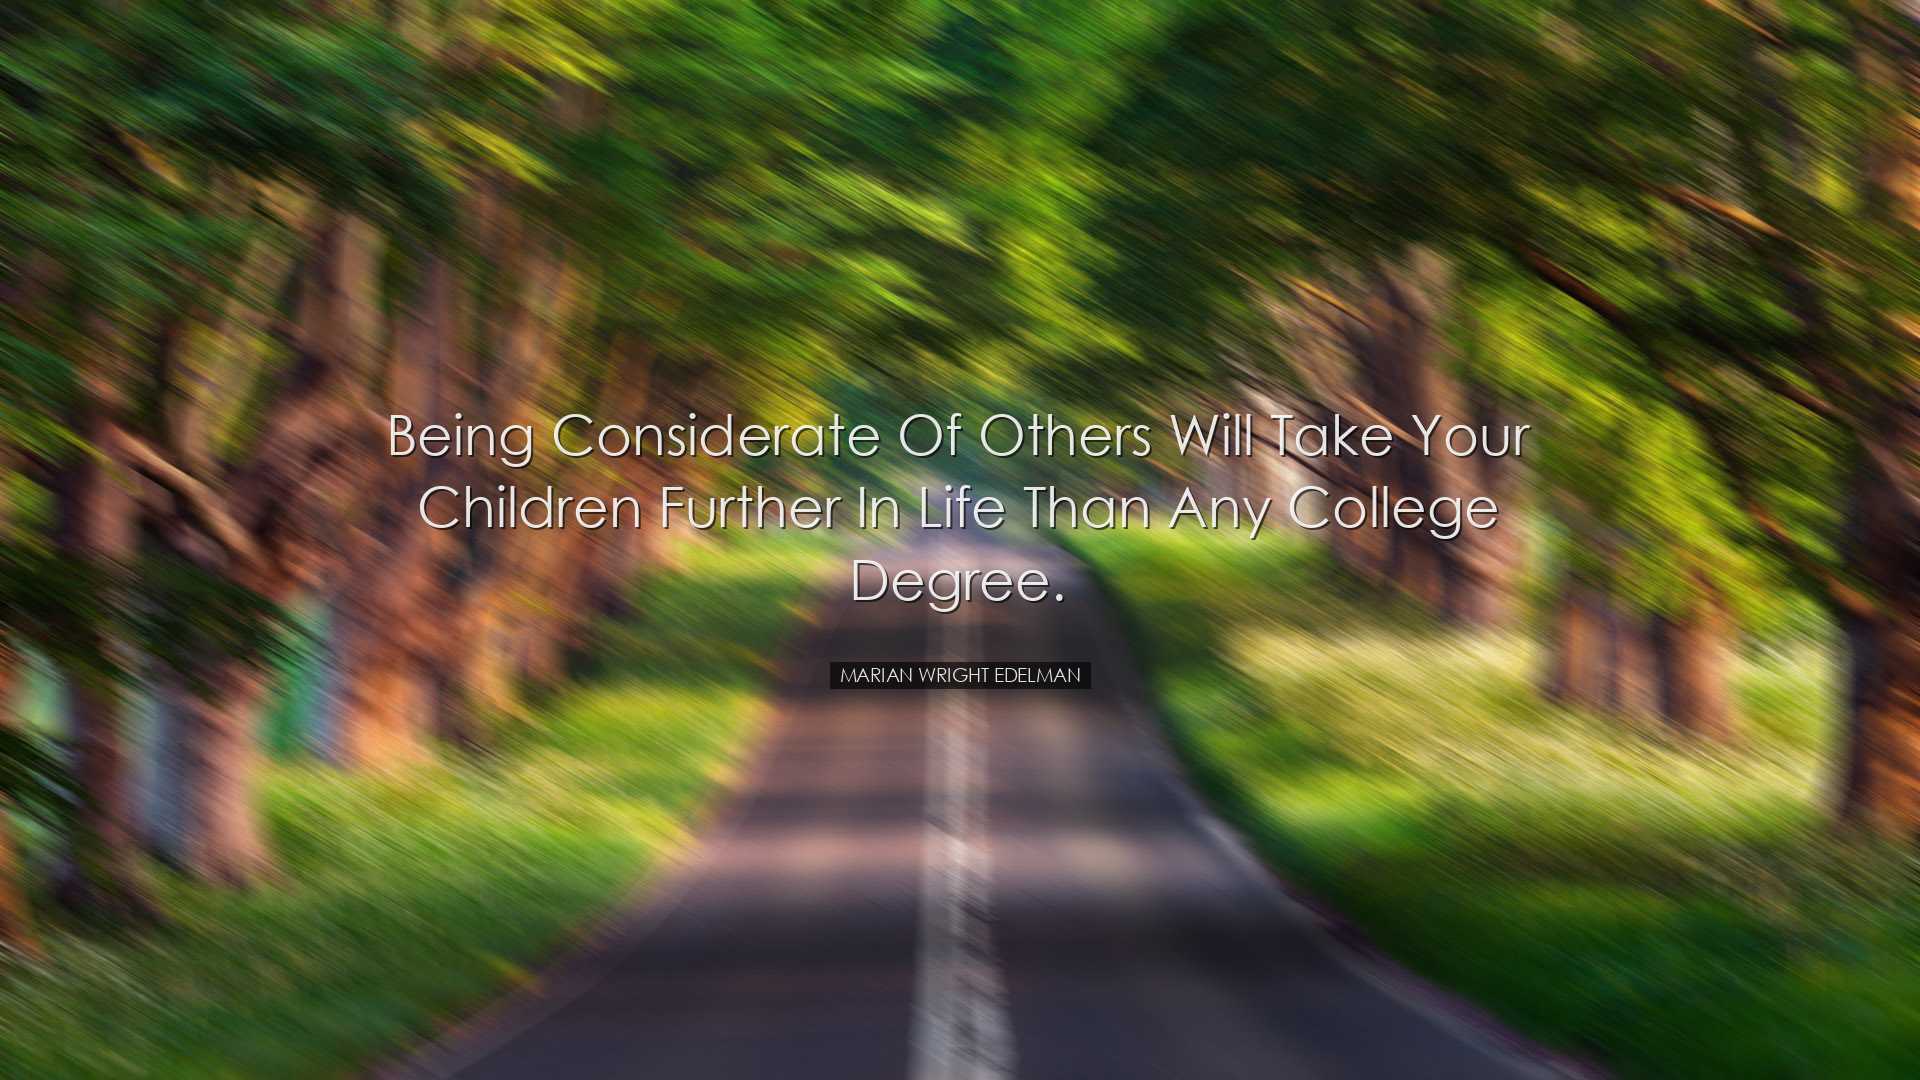 Being considerate of others will take your children further in lif